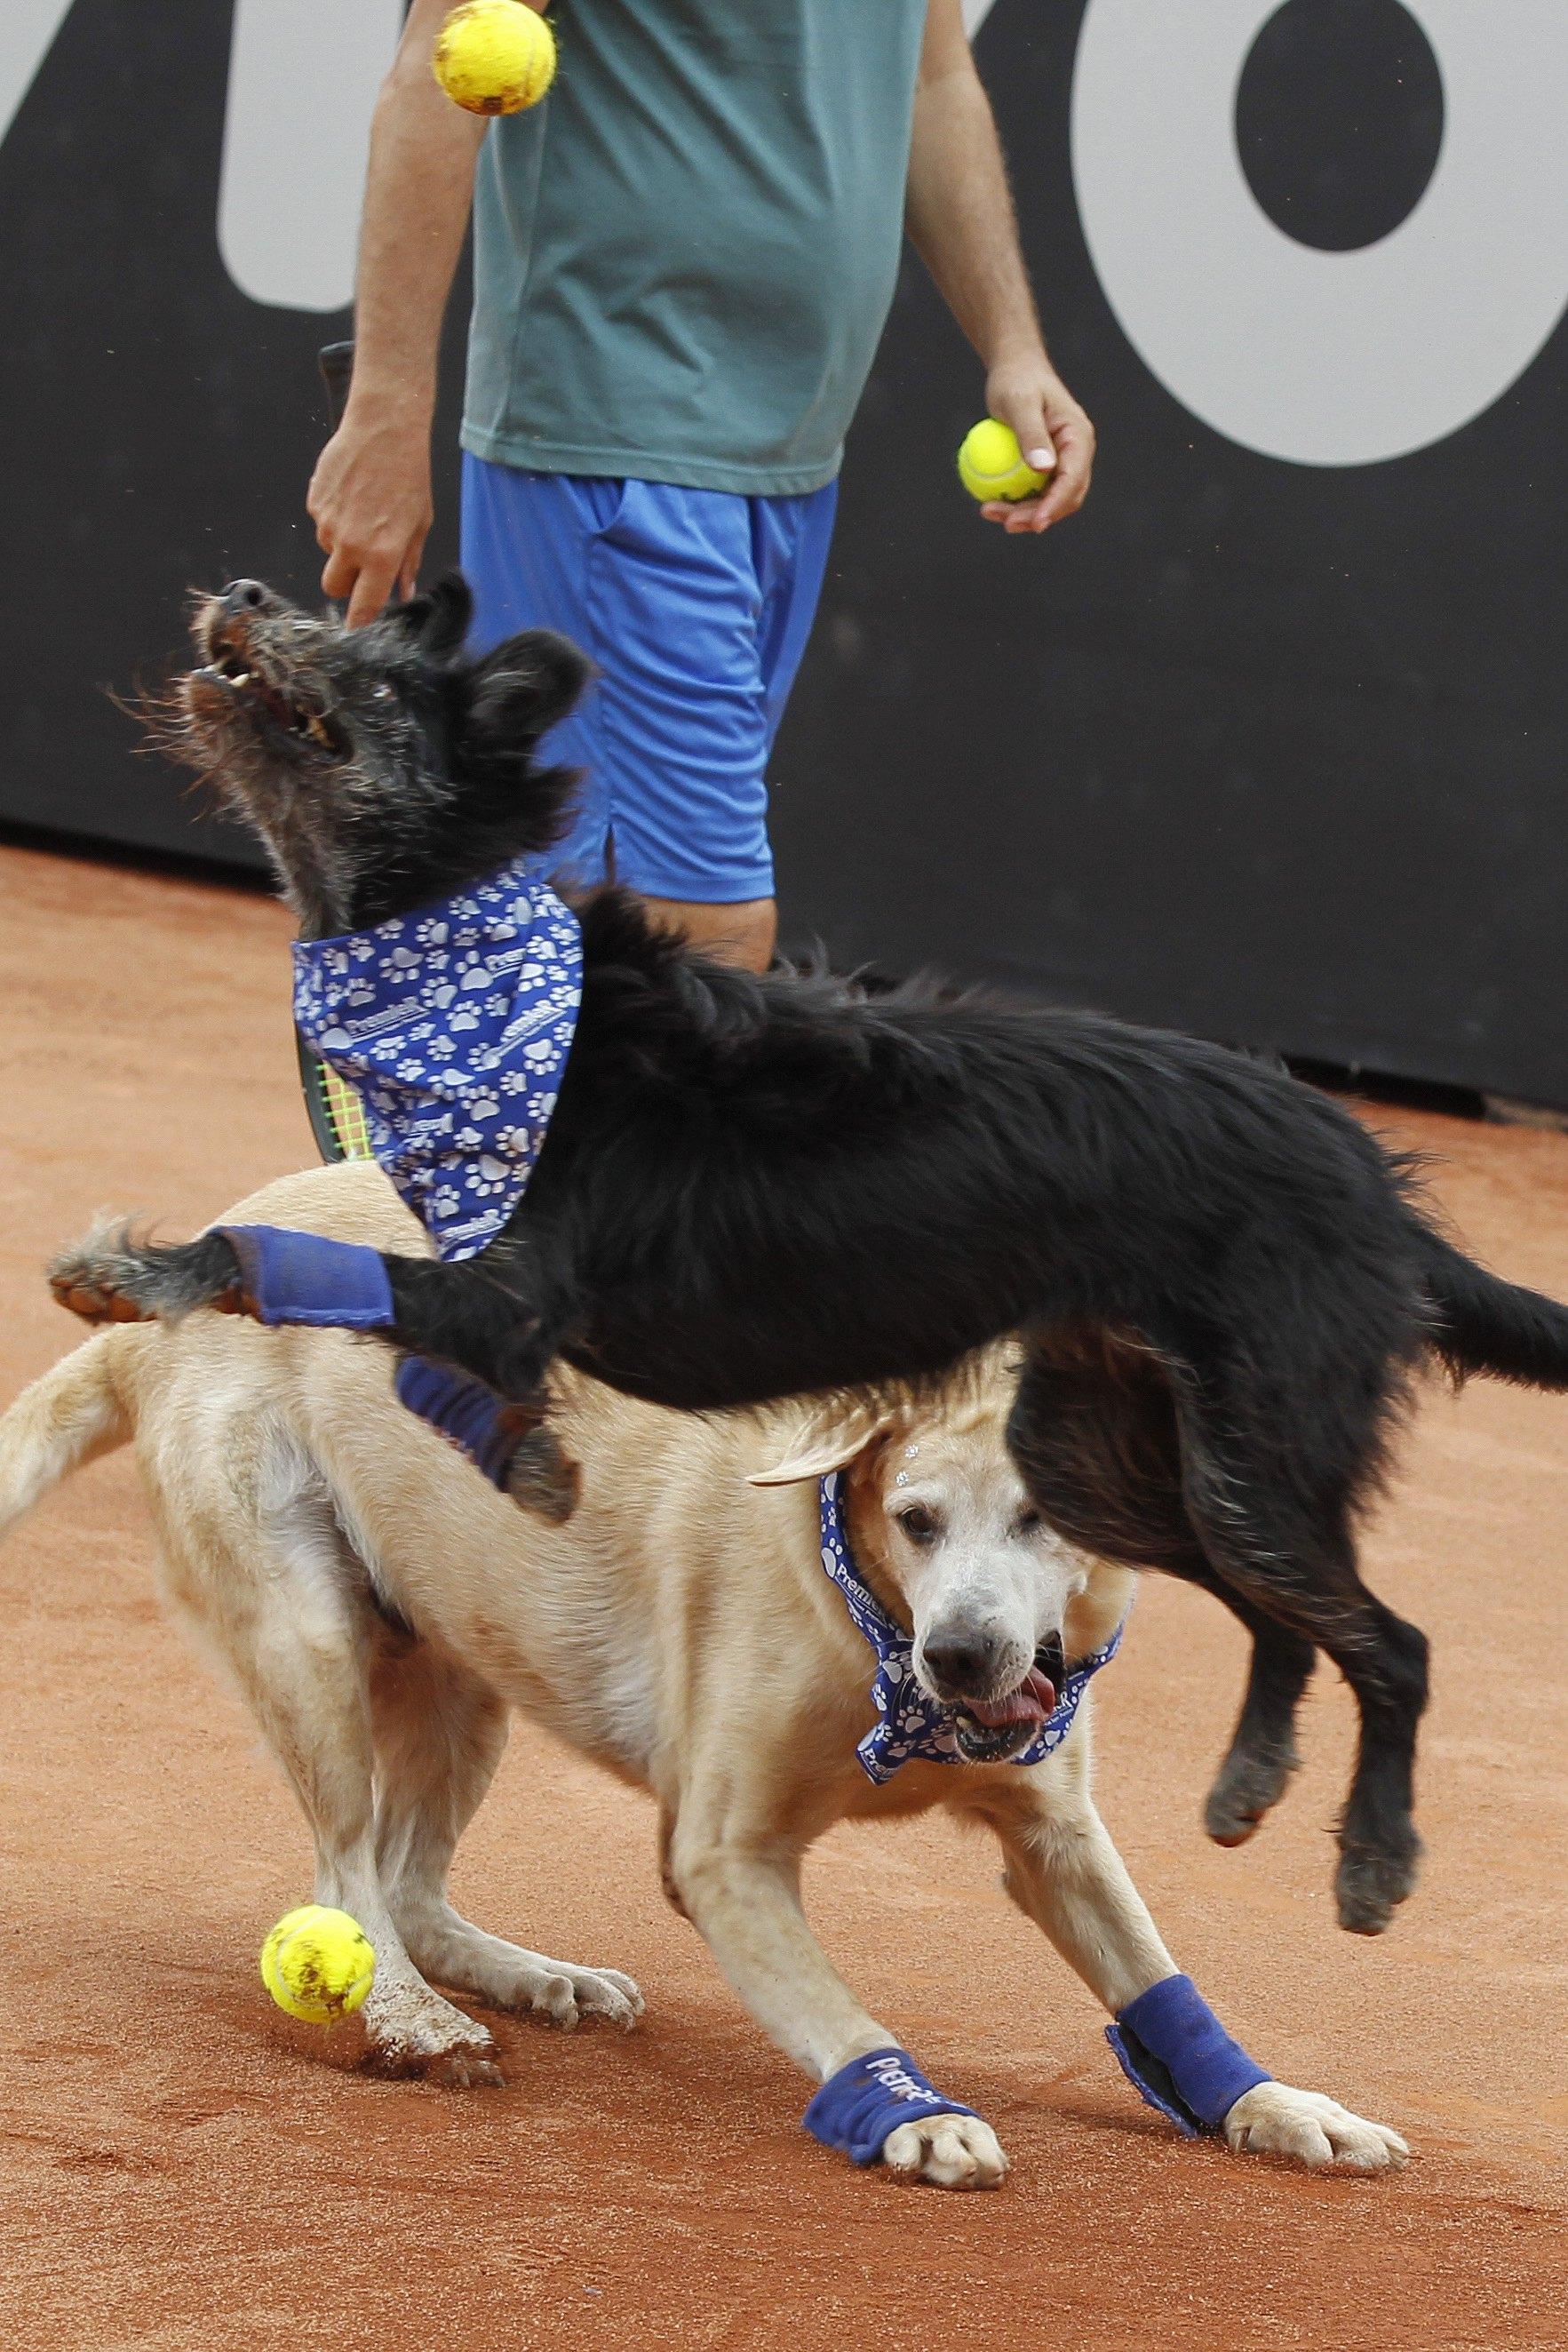 epa05829860 Trained dogs collect tennis balls, during an exhibition event aimed at promoting the adoption of stray animals, during their ATP 250 Brazil Open 2017 in Sao Paulo, Brazil, 04 March 2017. EPA/Sebastiao Moreira